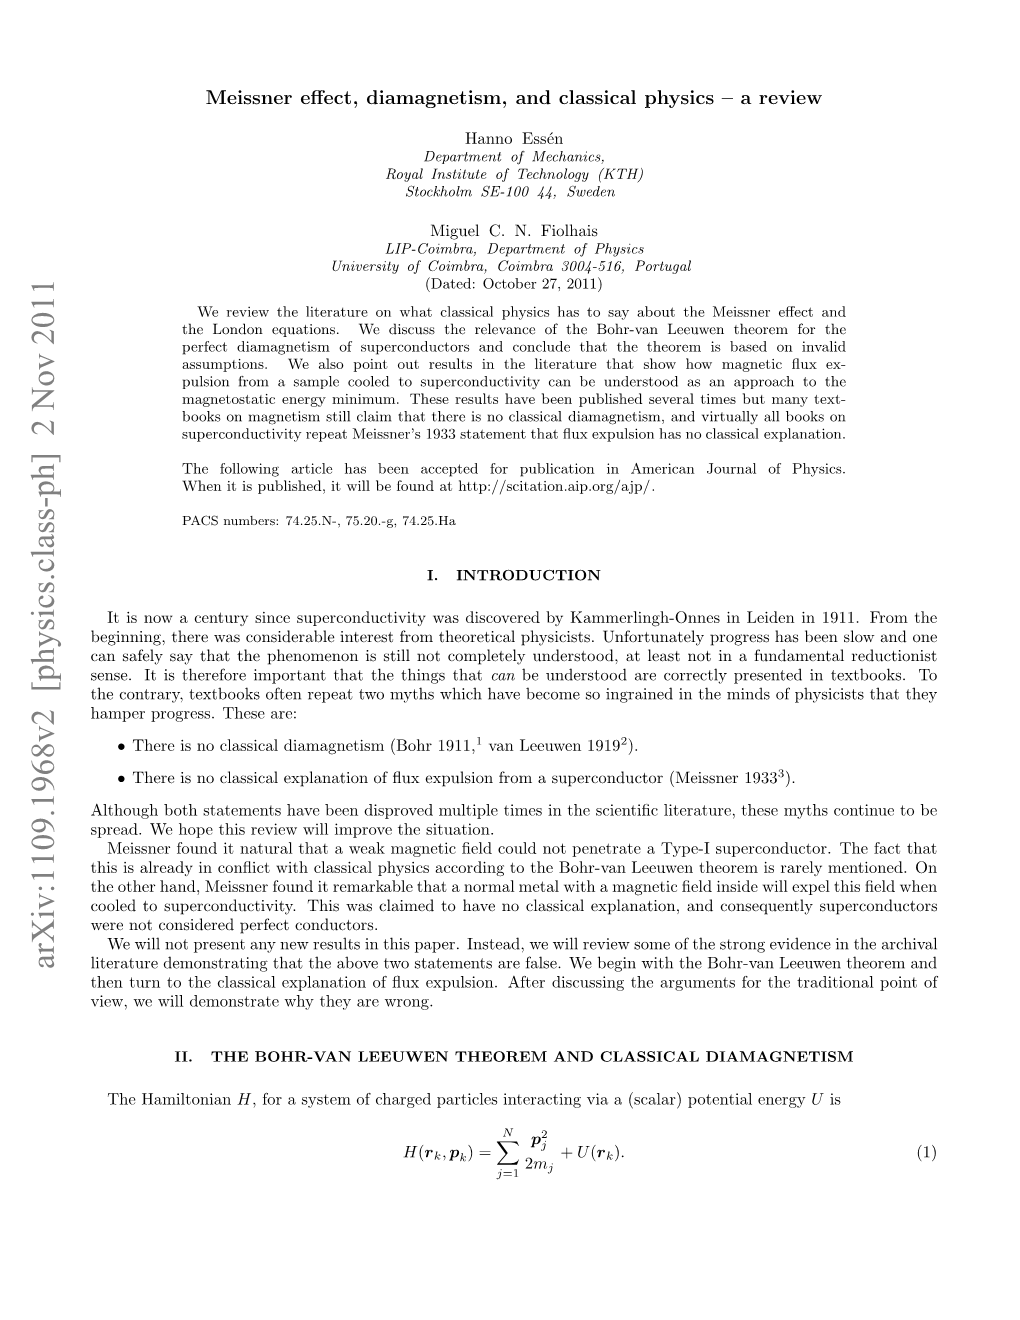 Meissner Effect, Diamagnetism, and Classical Physics-A Review